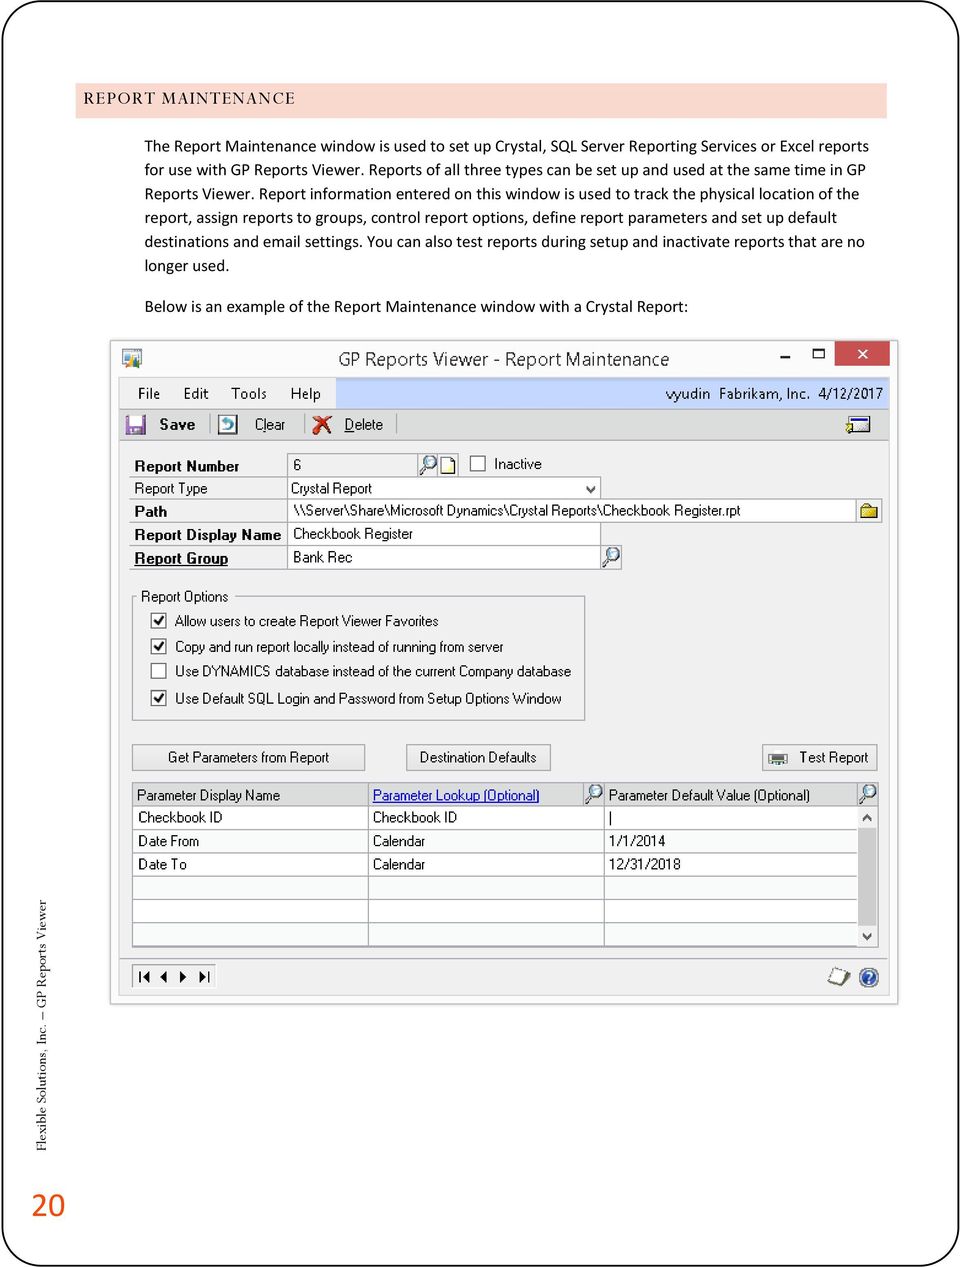 Report information entered on this window is used to track the physical location of the report, assign reports to groups, control report options, define